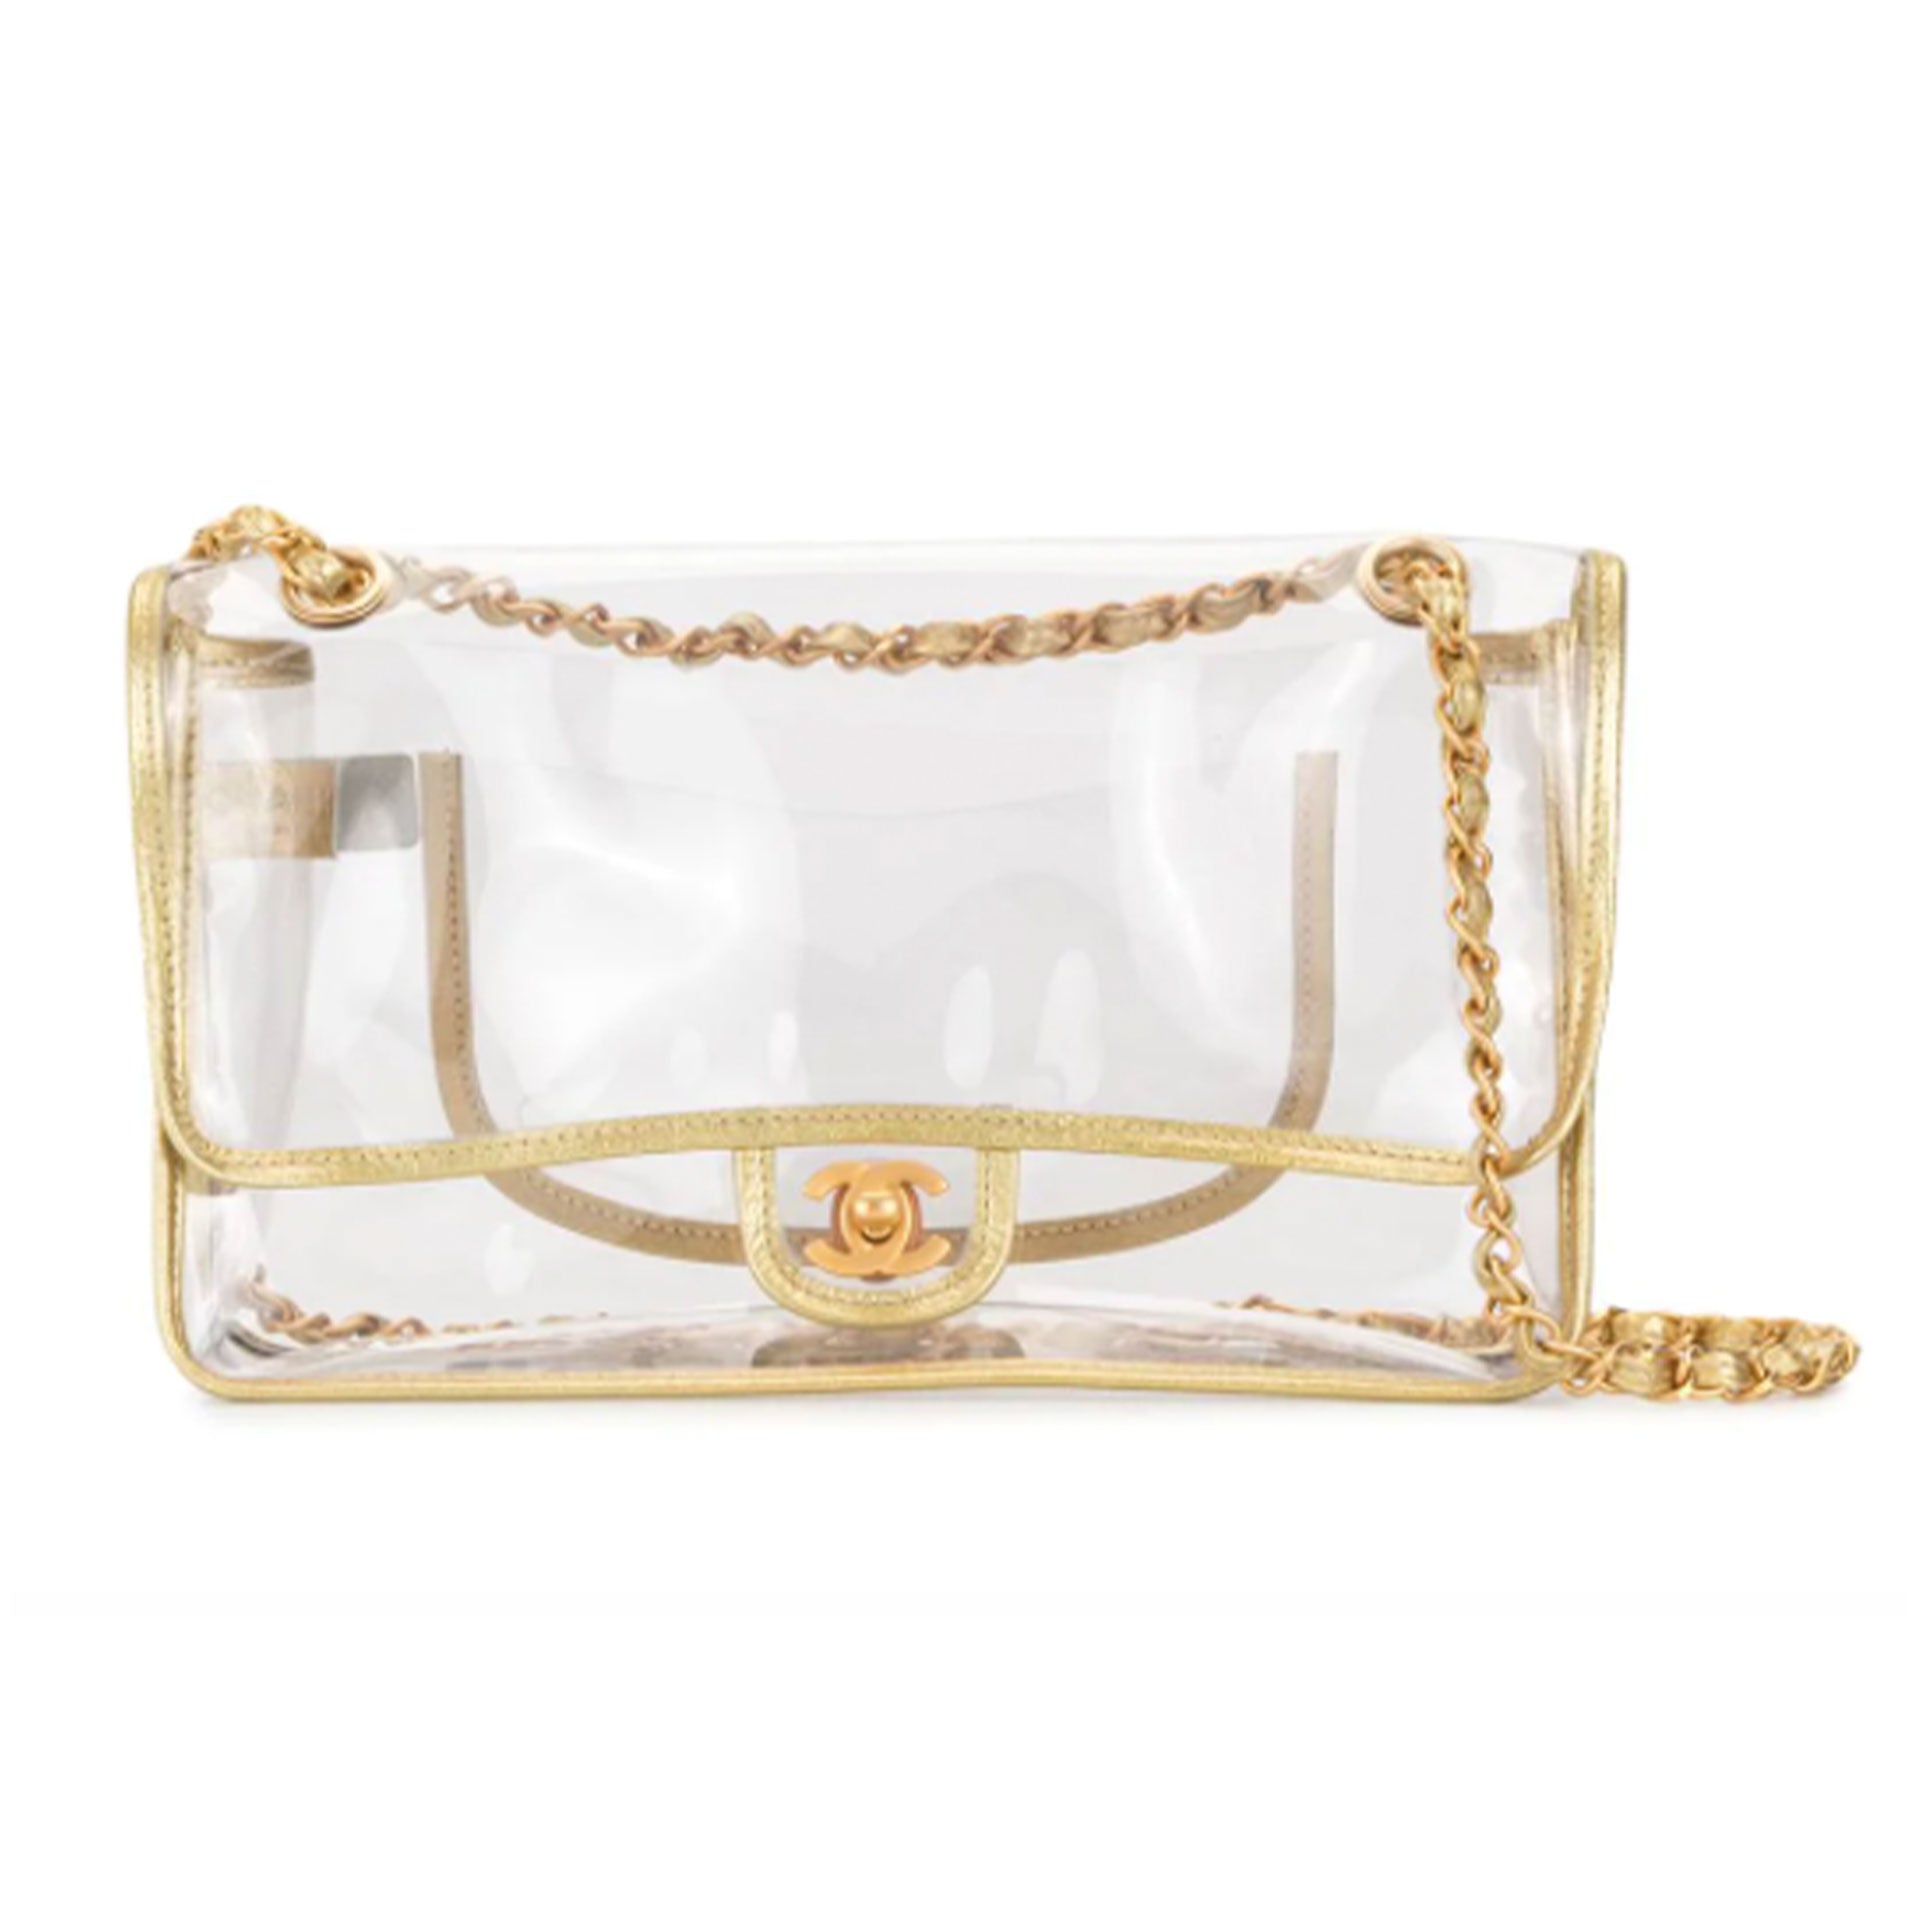 Chanel Clear Bag - 46 For Sale on 1stDibs